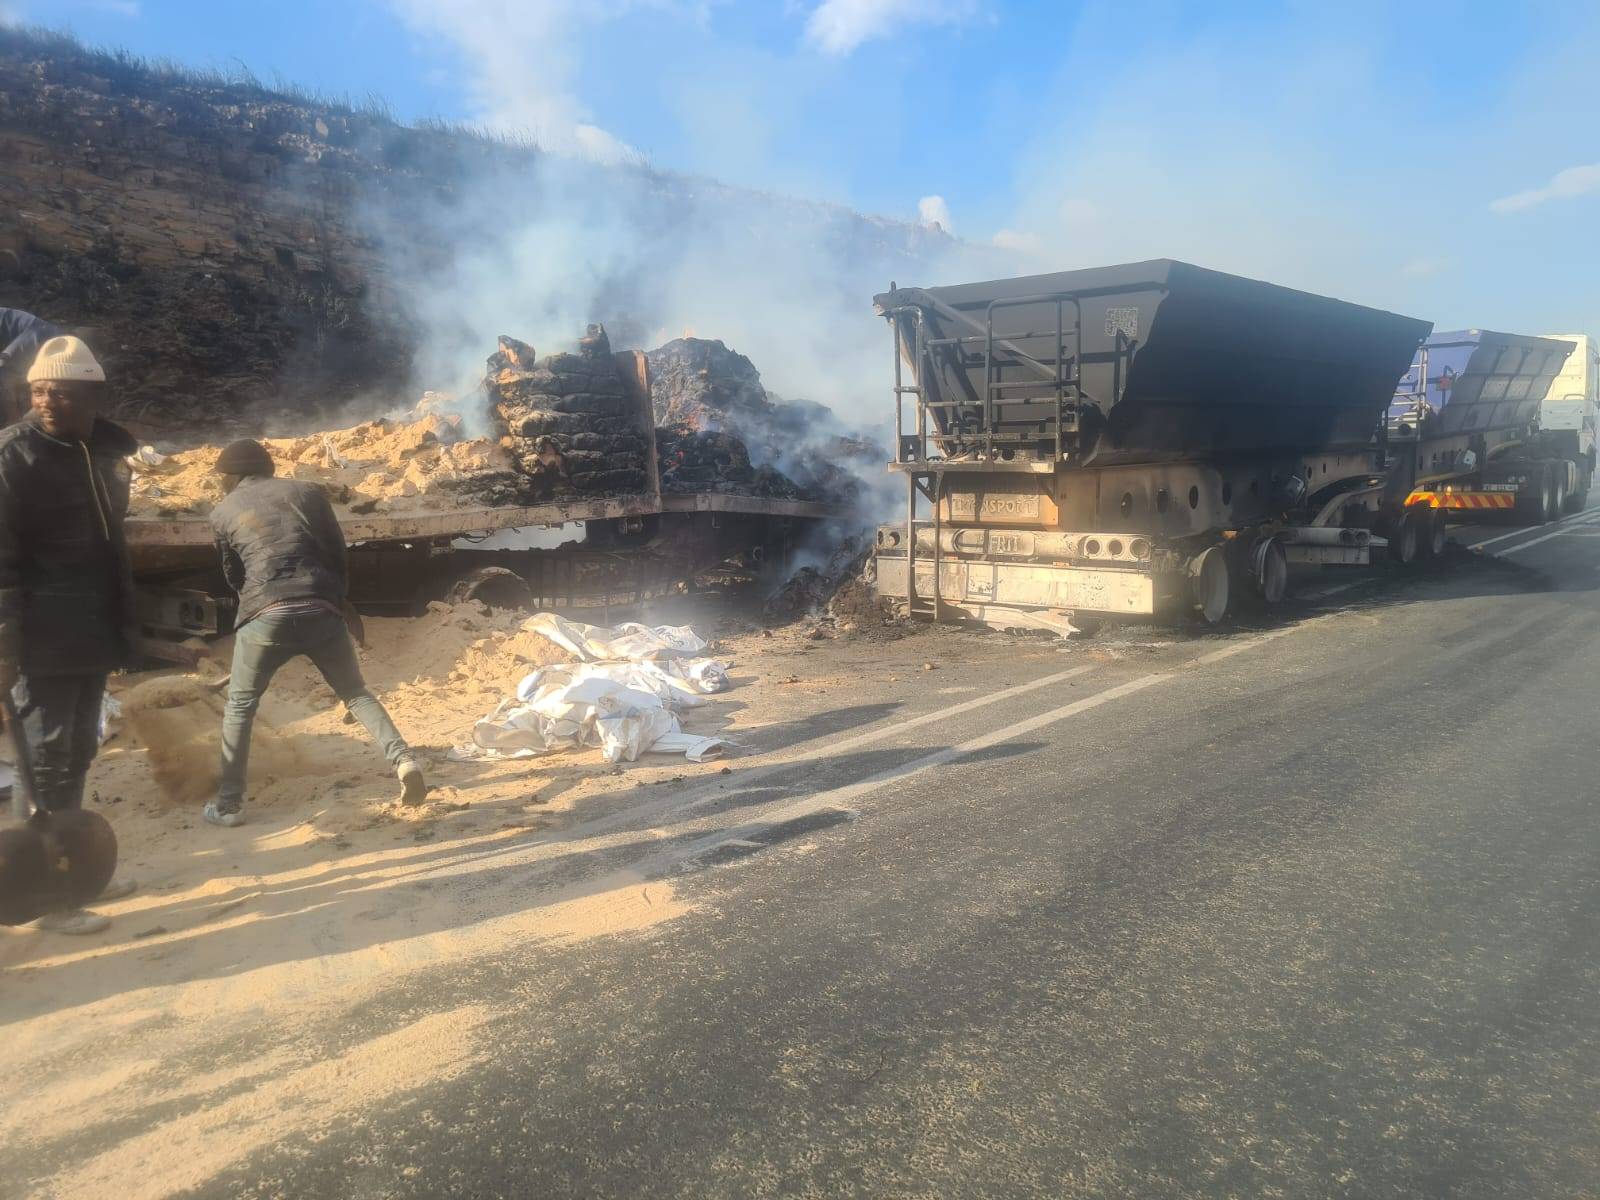 South Africans Torch 11 Trucks Over Foreign Drivers